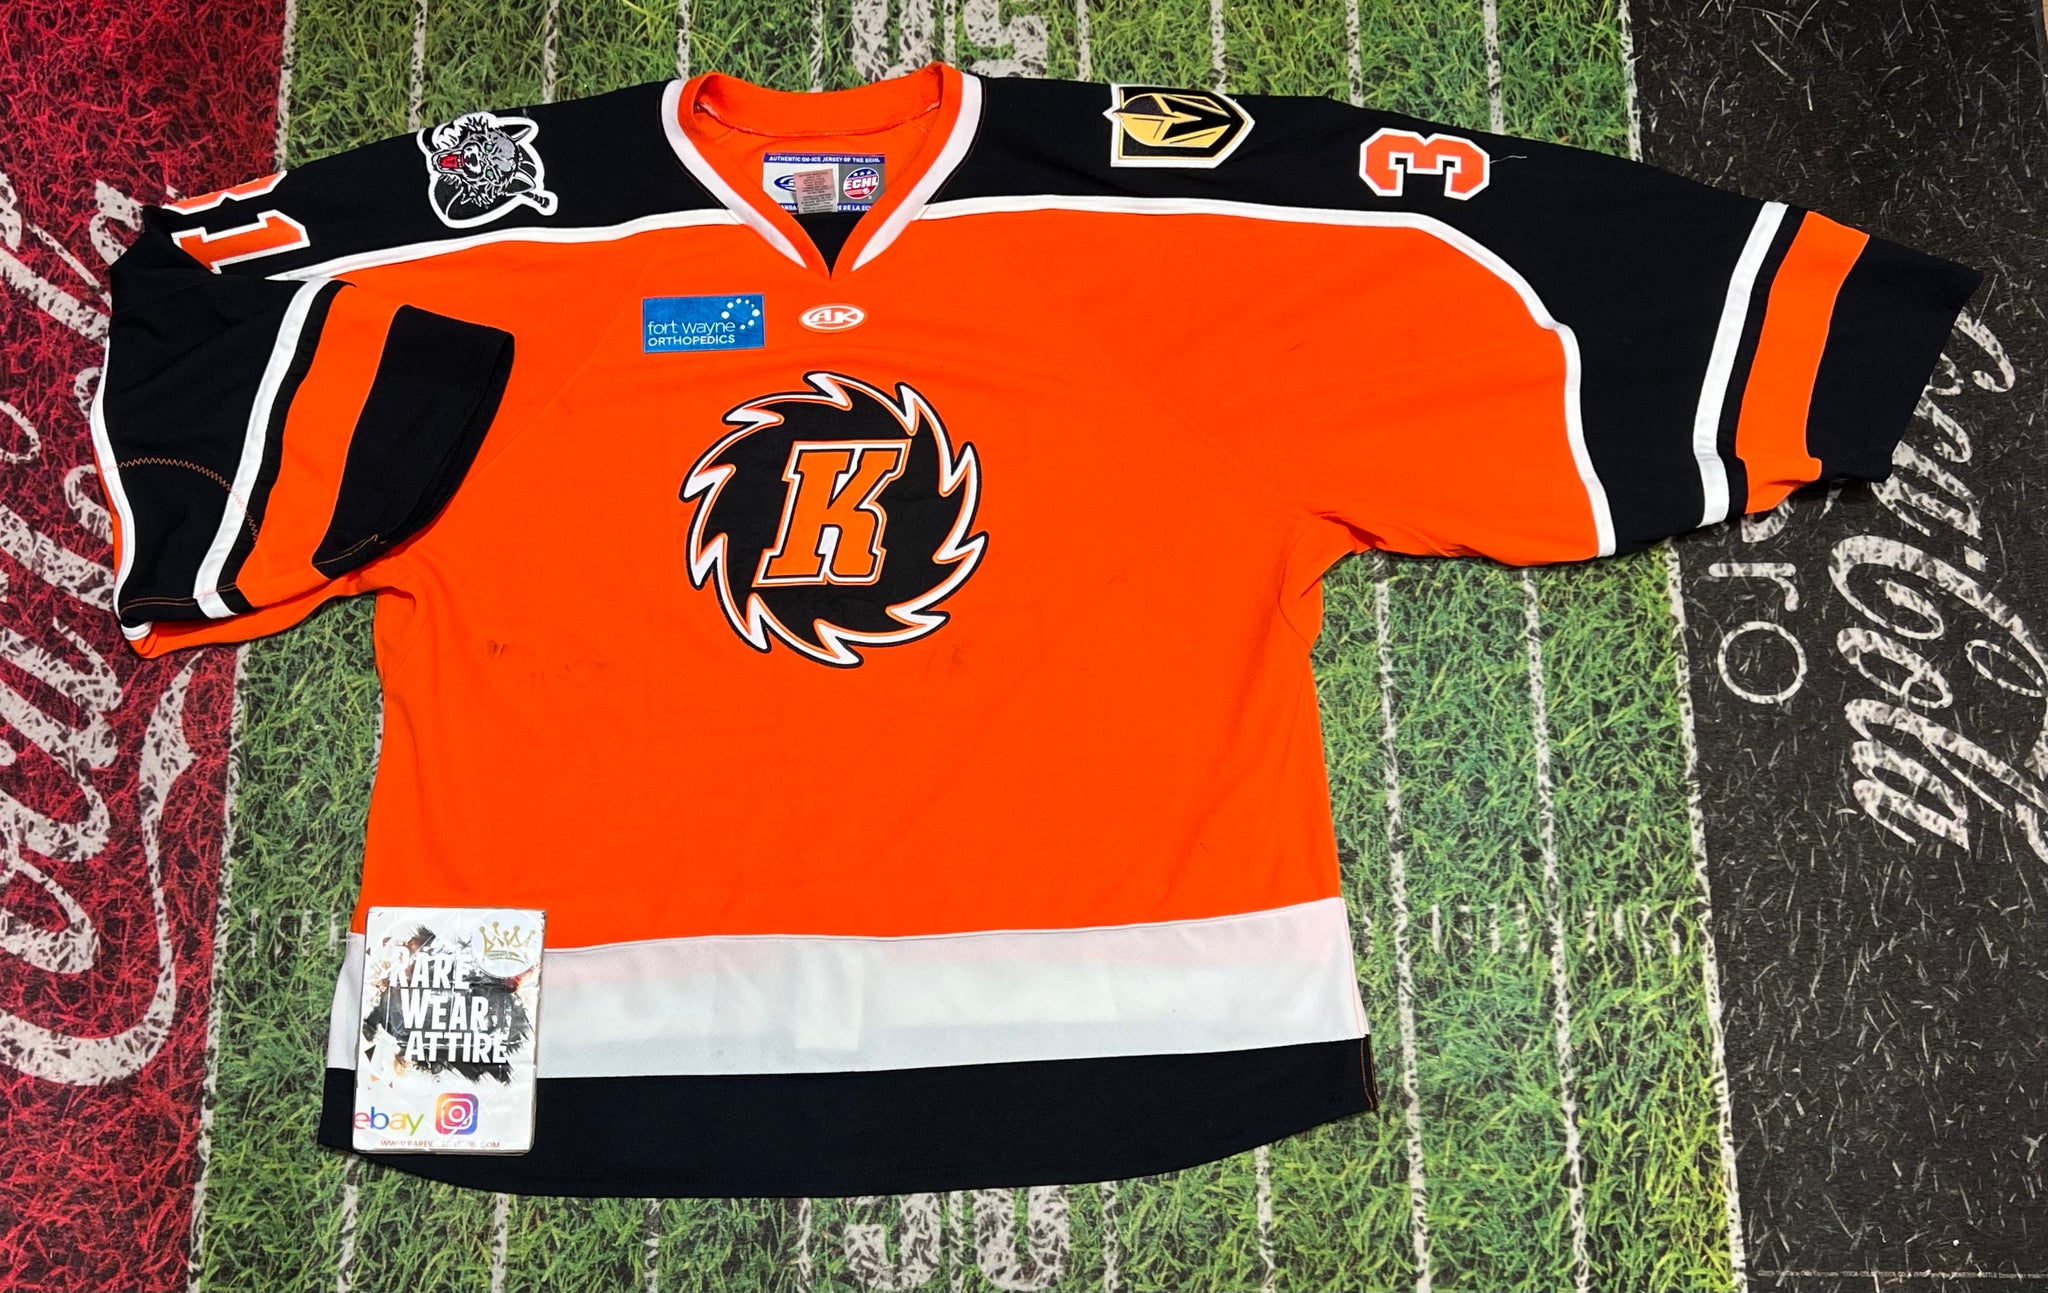 Fort Wayne Komets on X: SATURDAY: Win a game-worn jersey as we raffle off  the entire set of Orange Spaceman Jerseys! Raffle Tickets: 3 🎟 for $10 10  🎟for $20  / X